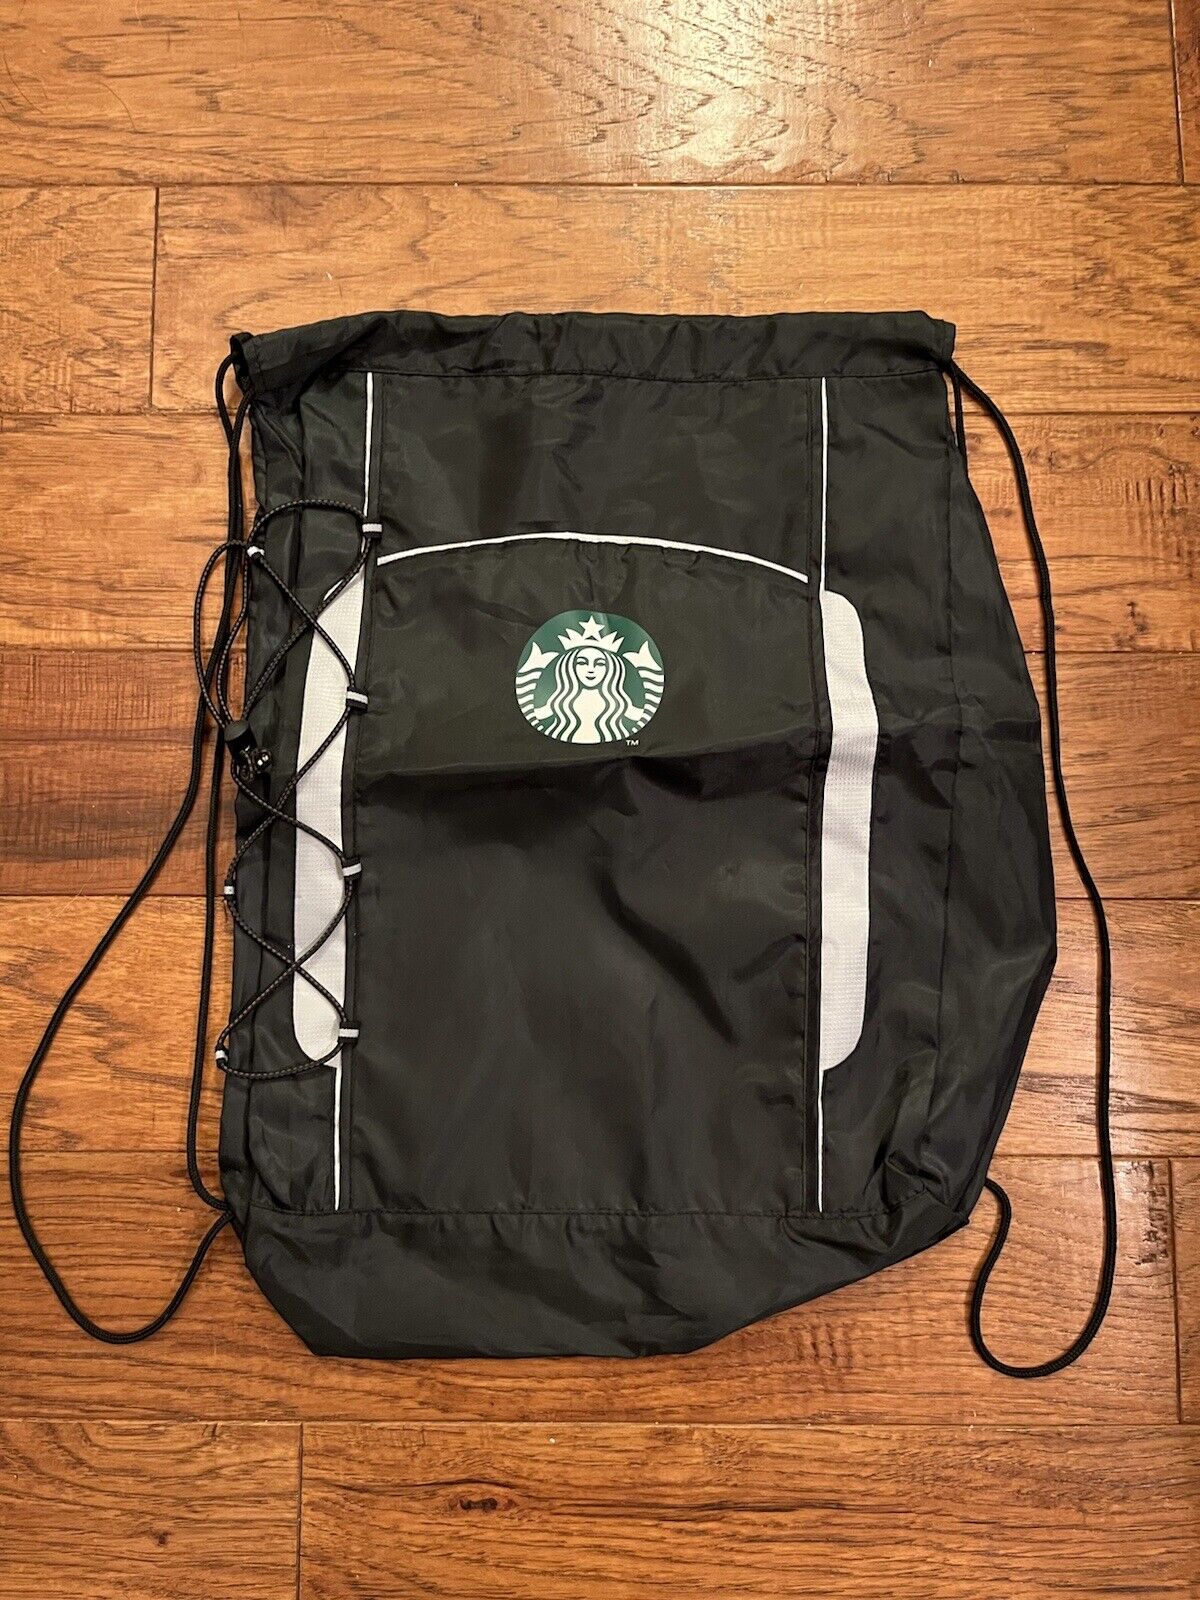 Starbucks Drawstring Backpack - Never Used w/ Siren Logo - Perfect Condition